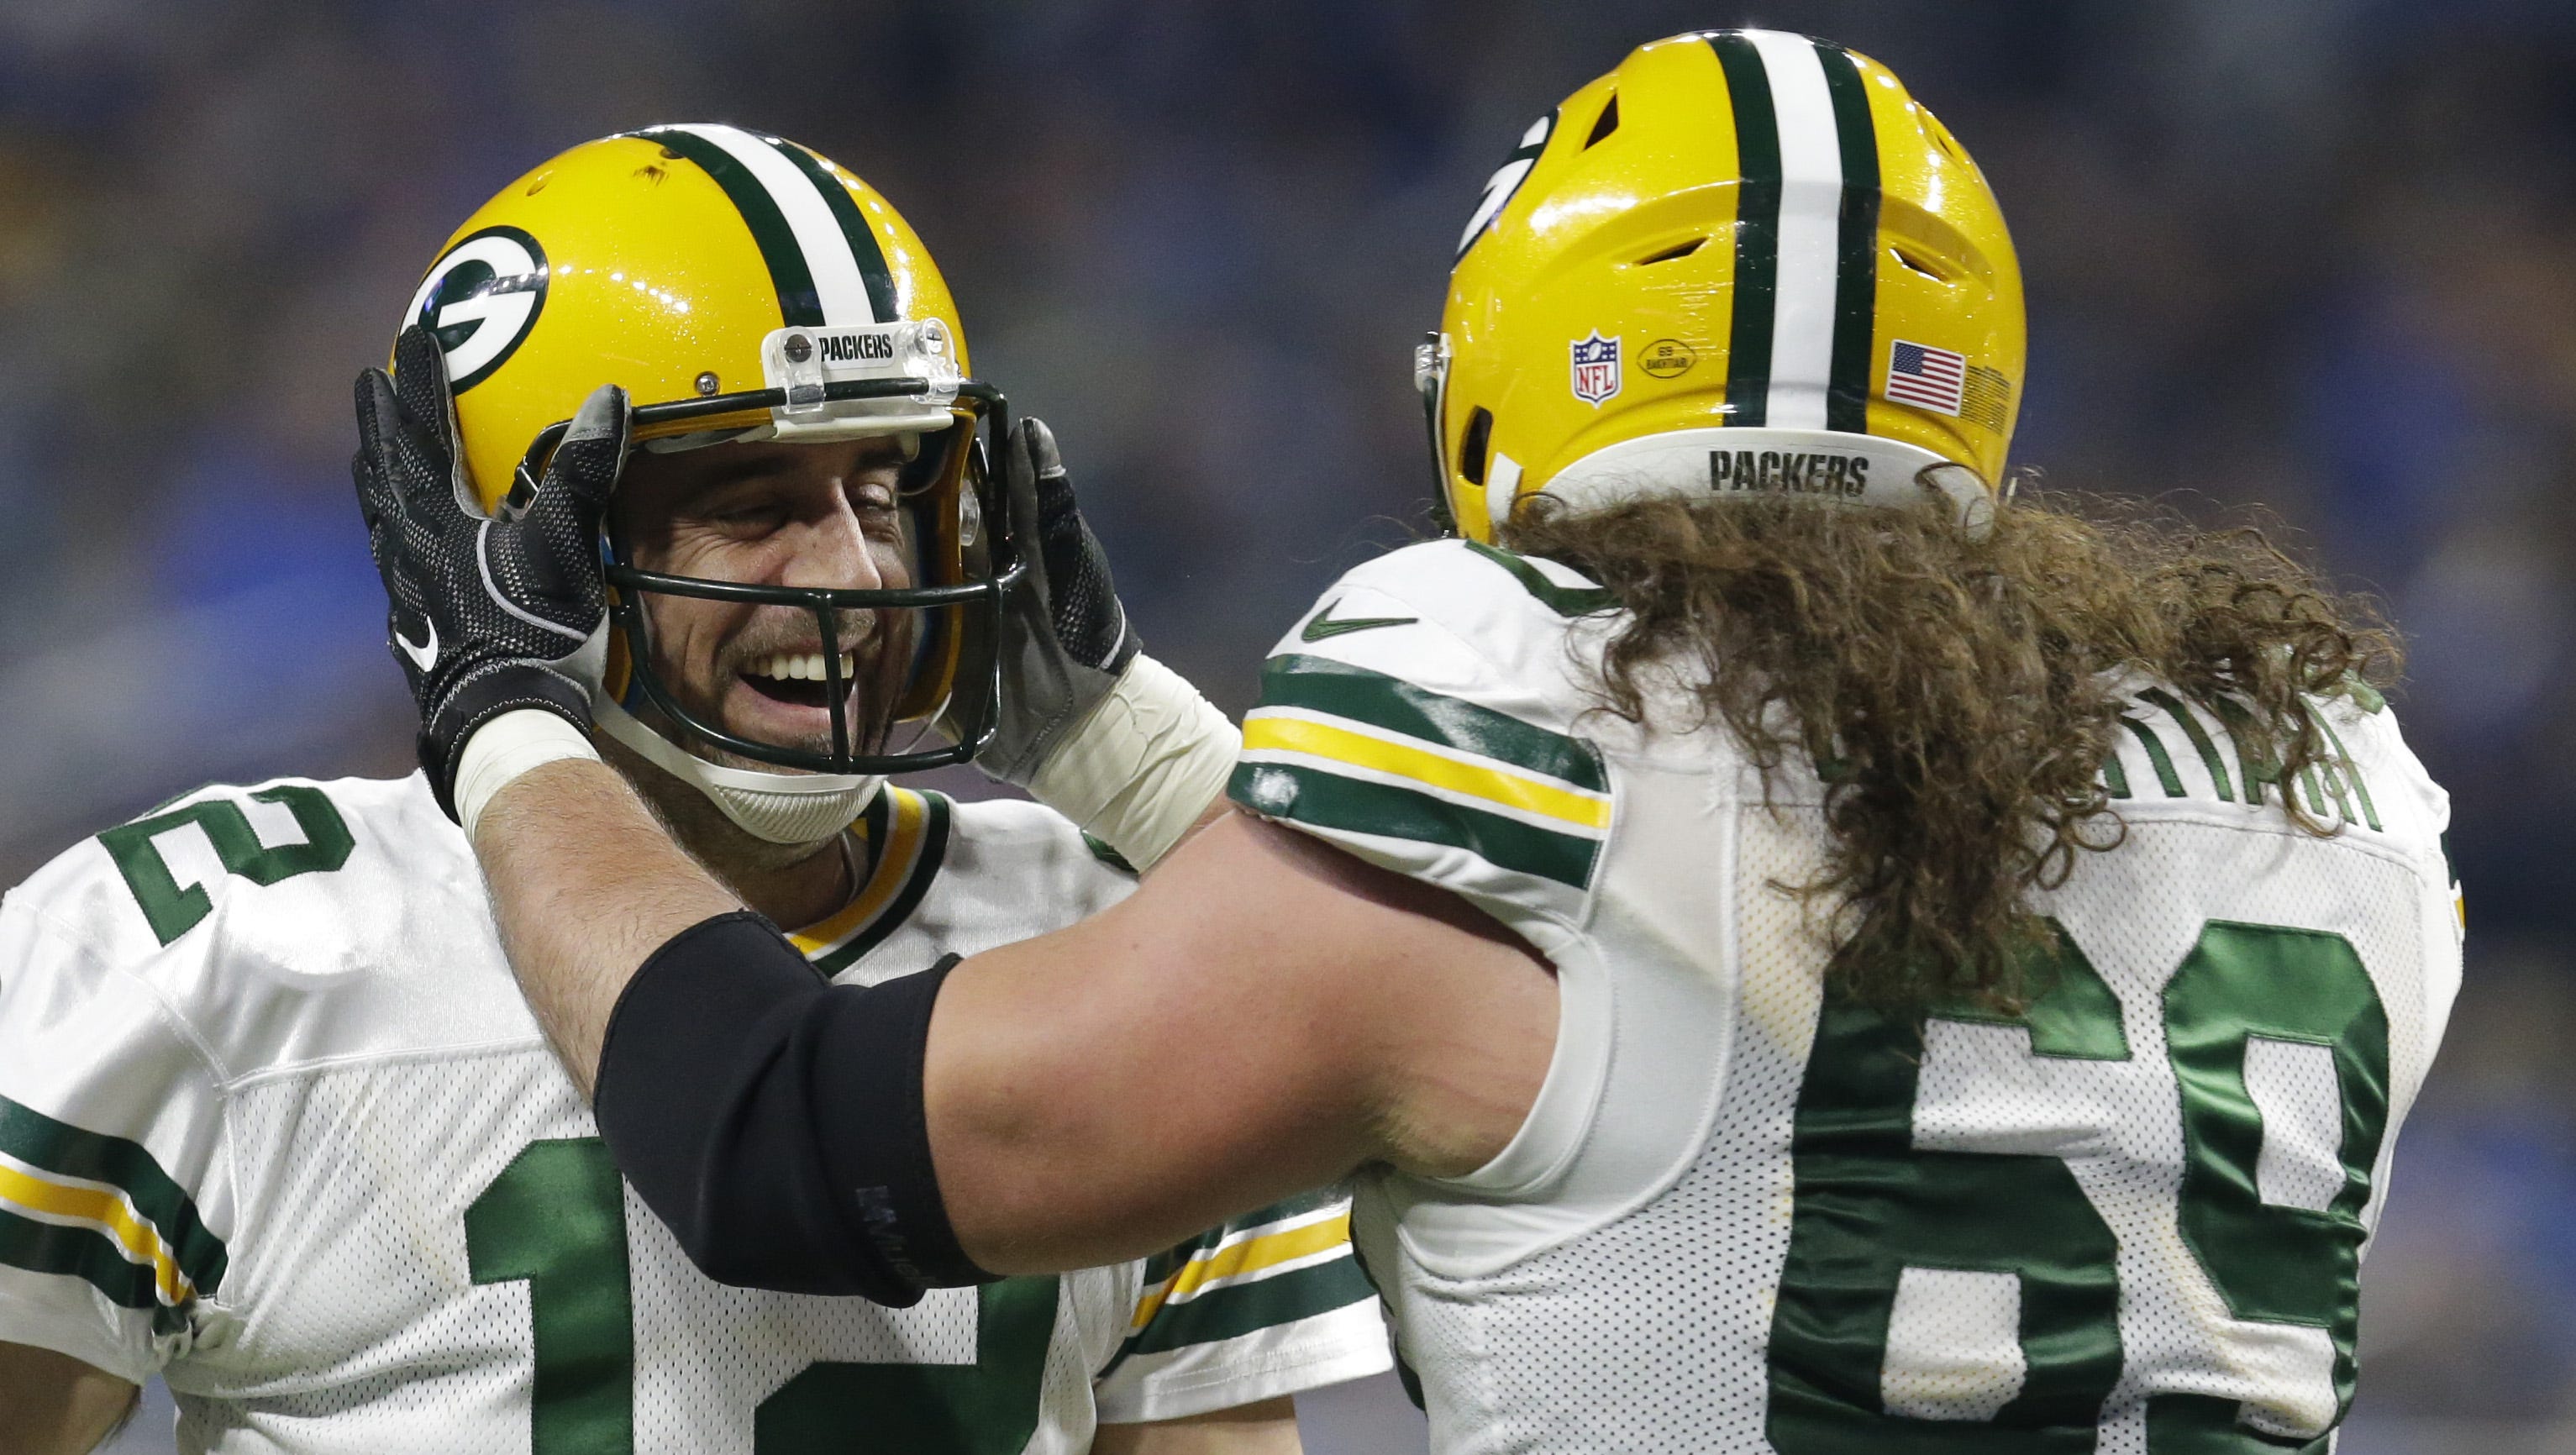 Green Bay Packers quarterback Aaron Rodgers (12) and left tackle David Bakhtiari (69) celebrate fullback Aaron Ripkowski's (22) touchdown run during the second quarter against the Detroit Lions on Jan. 1, 2017 at Ford Field in Detroit.